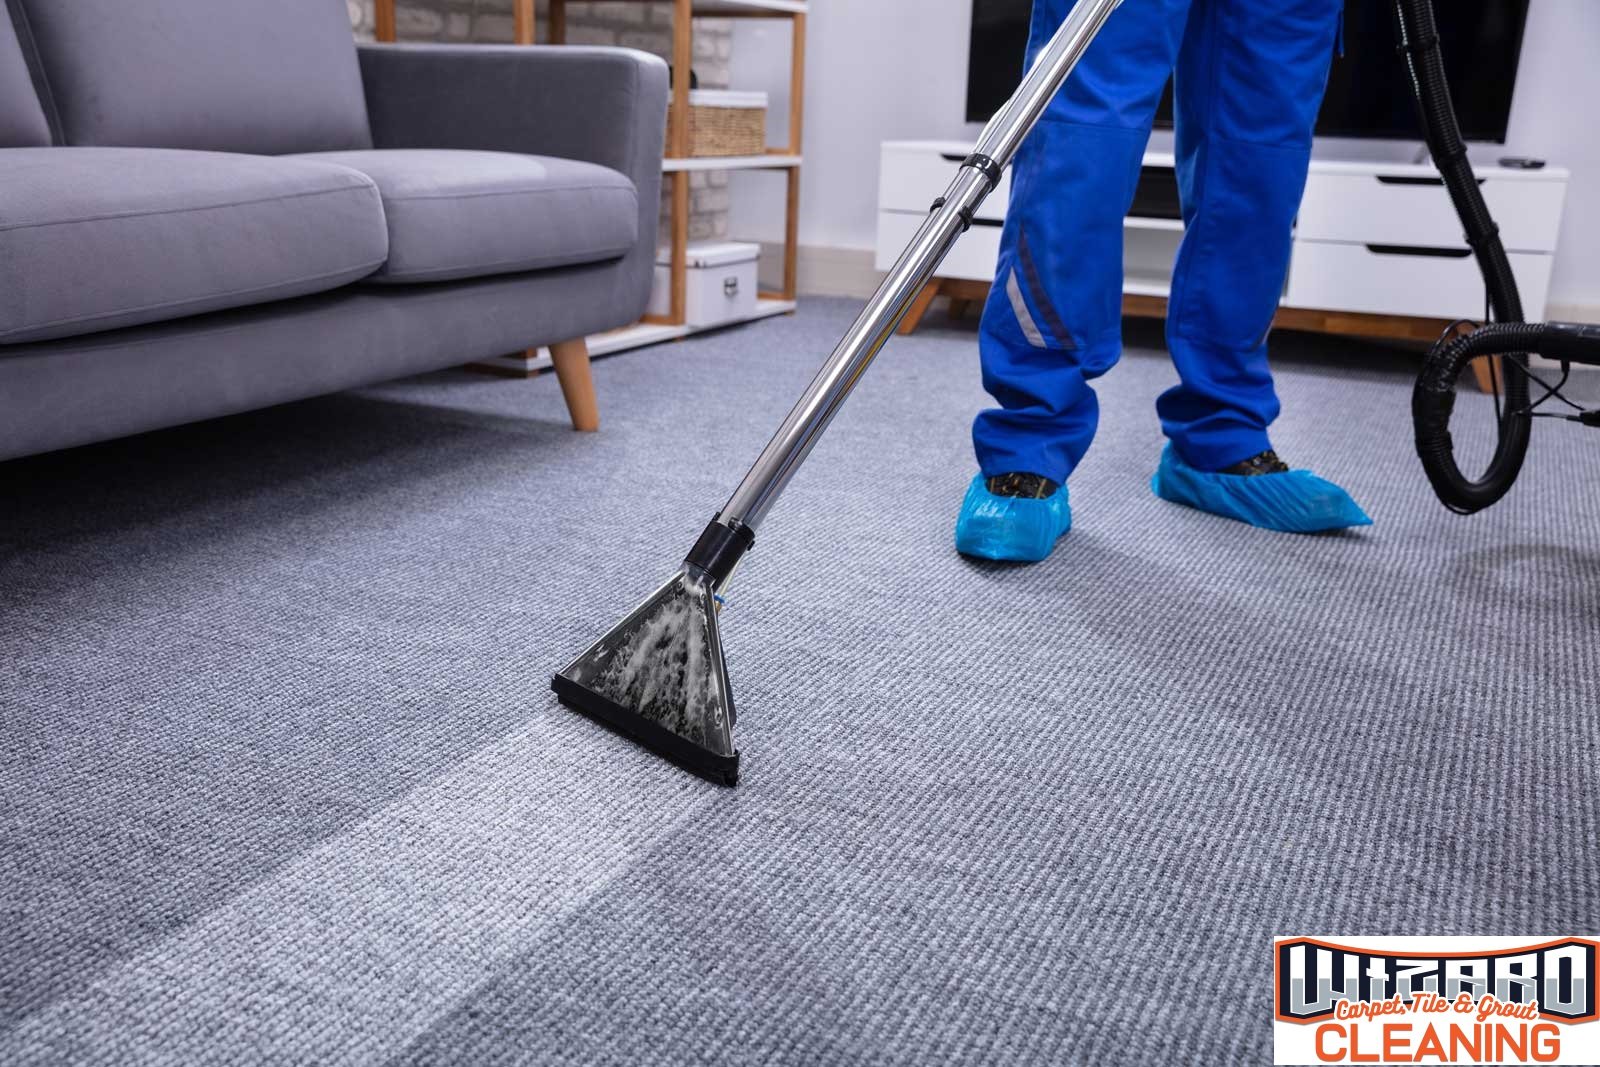 The Science of Clean: Understanding the Carpet Cleaning Process